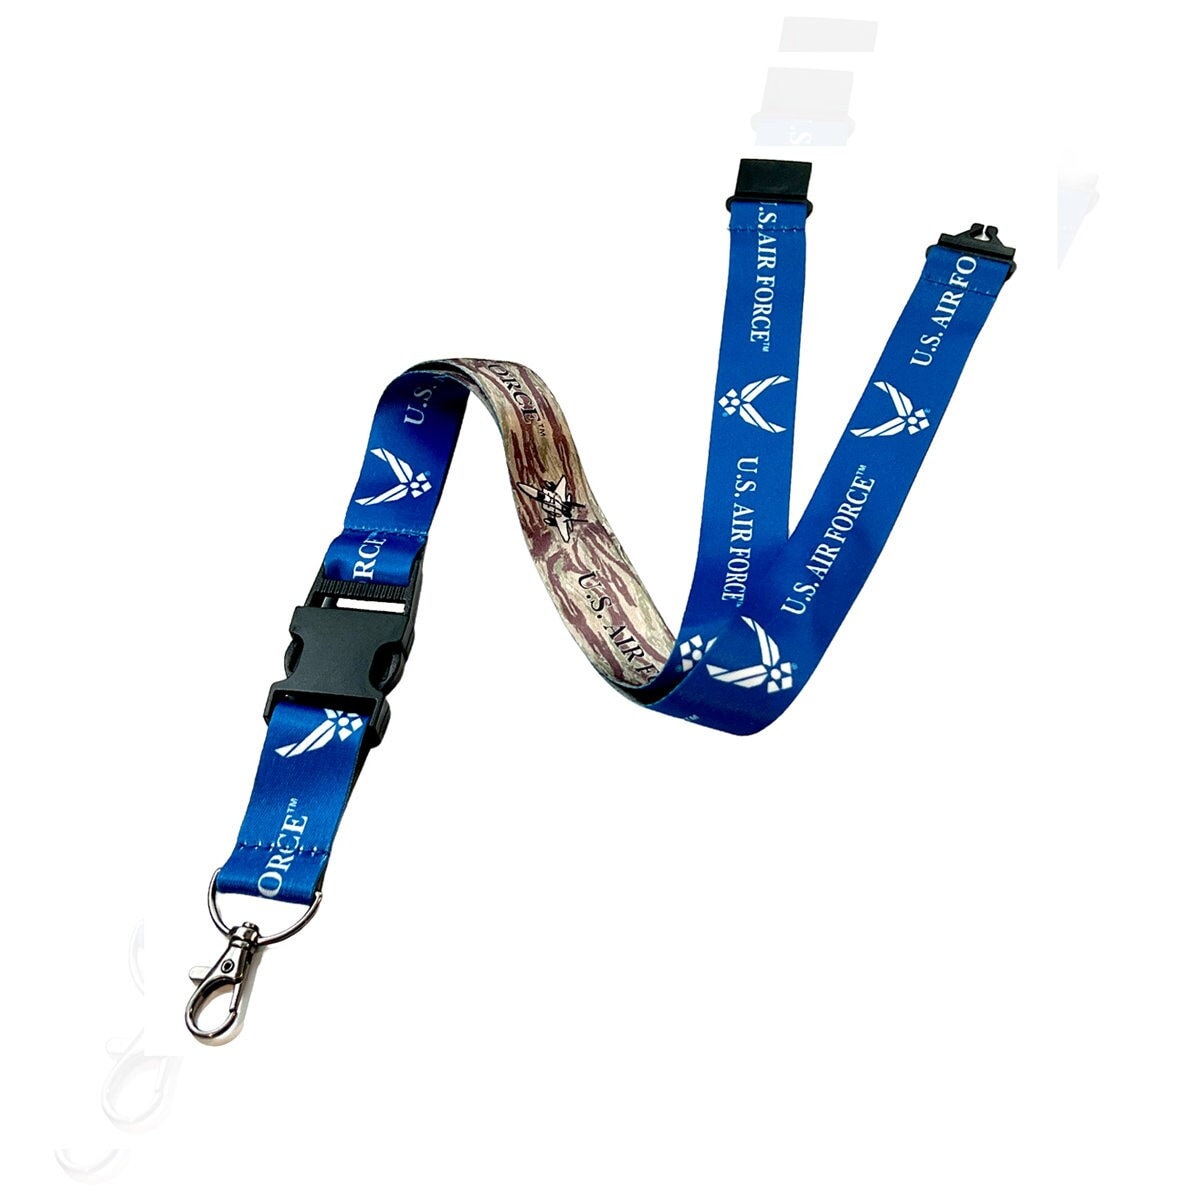 Personalized Vertical ID Badge Holder with Lanyard - Fashionable ID Card  Holders with Detachable Neck Lanyards - Soft Fiber,Metal Clip,Sturdy Buckle